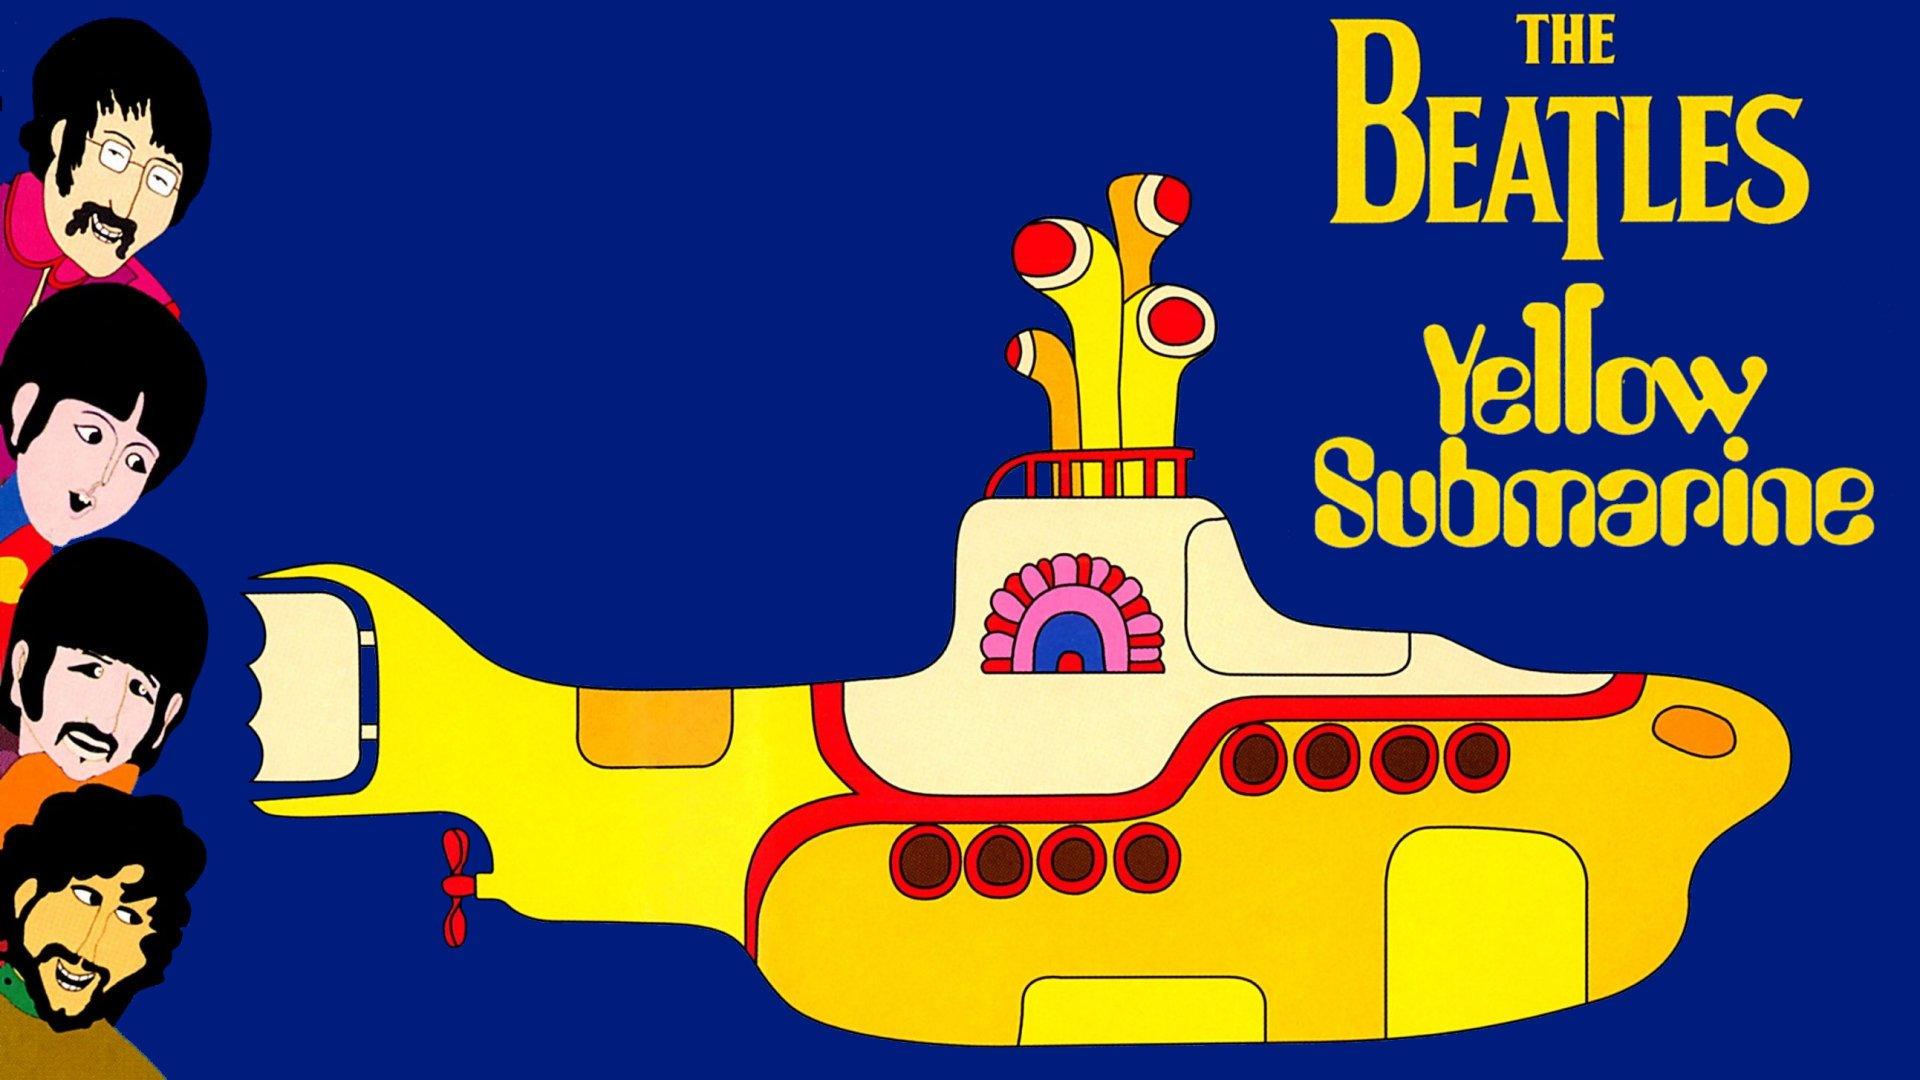 The Beatles In Yellow Submarine HD Wallpaper. Background Image